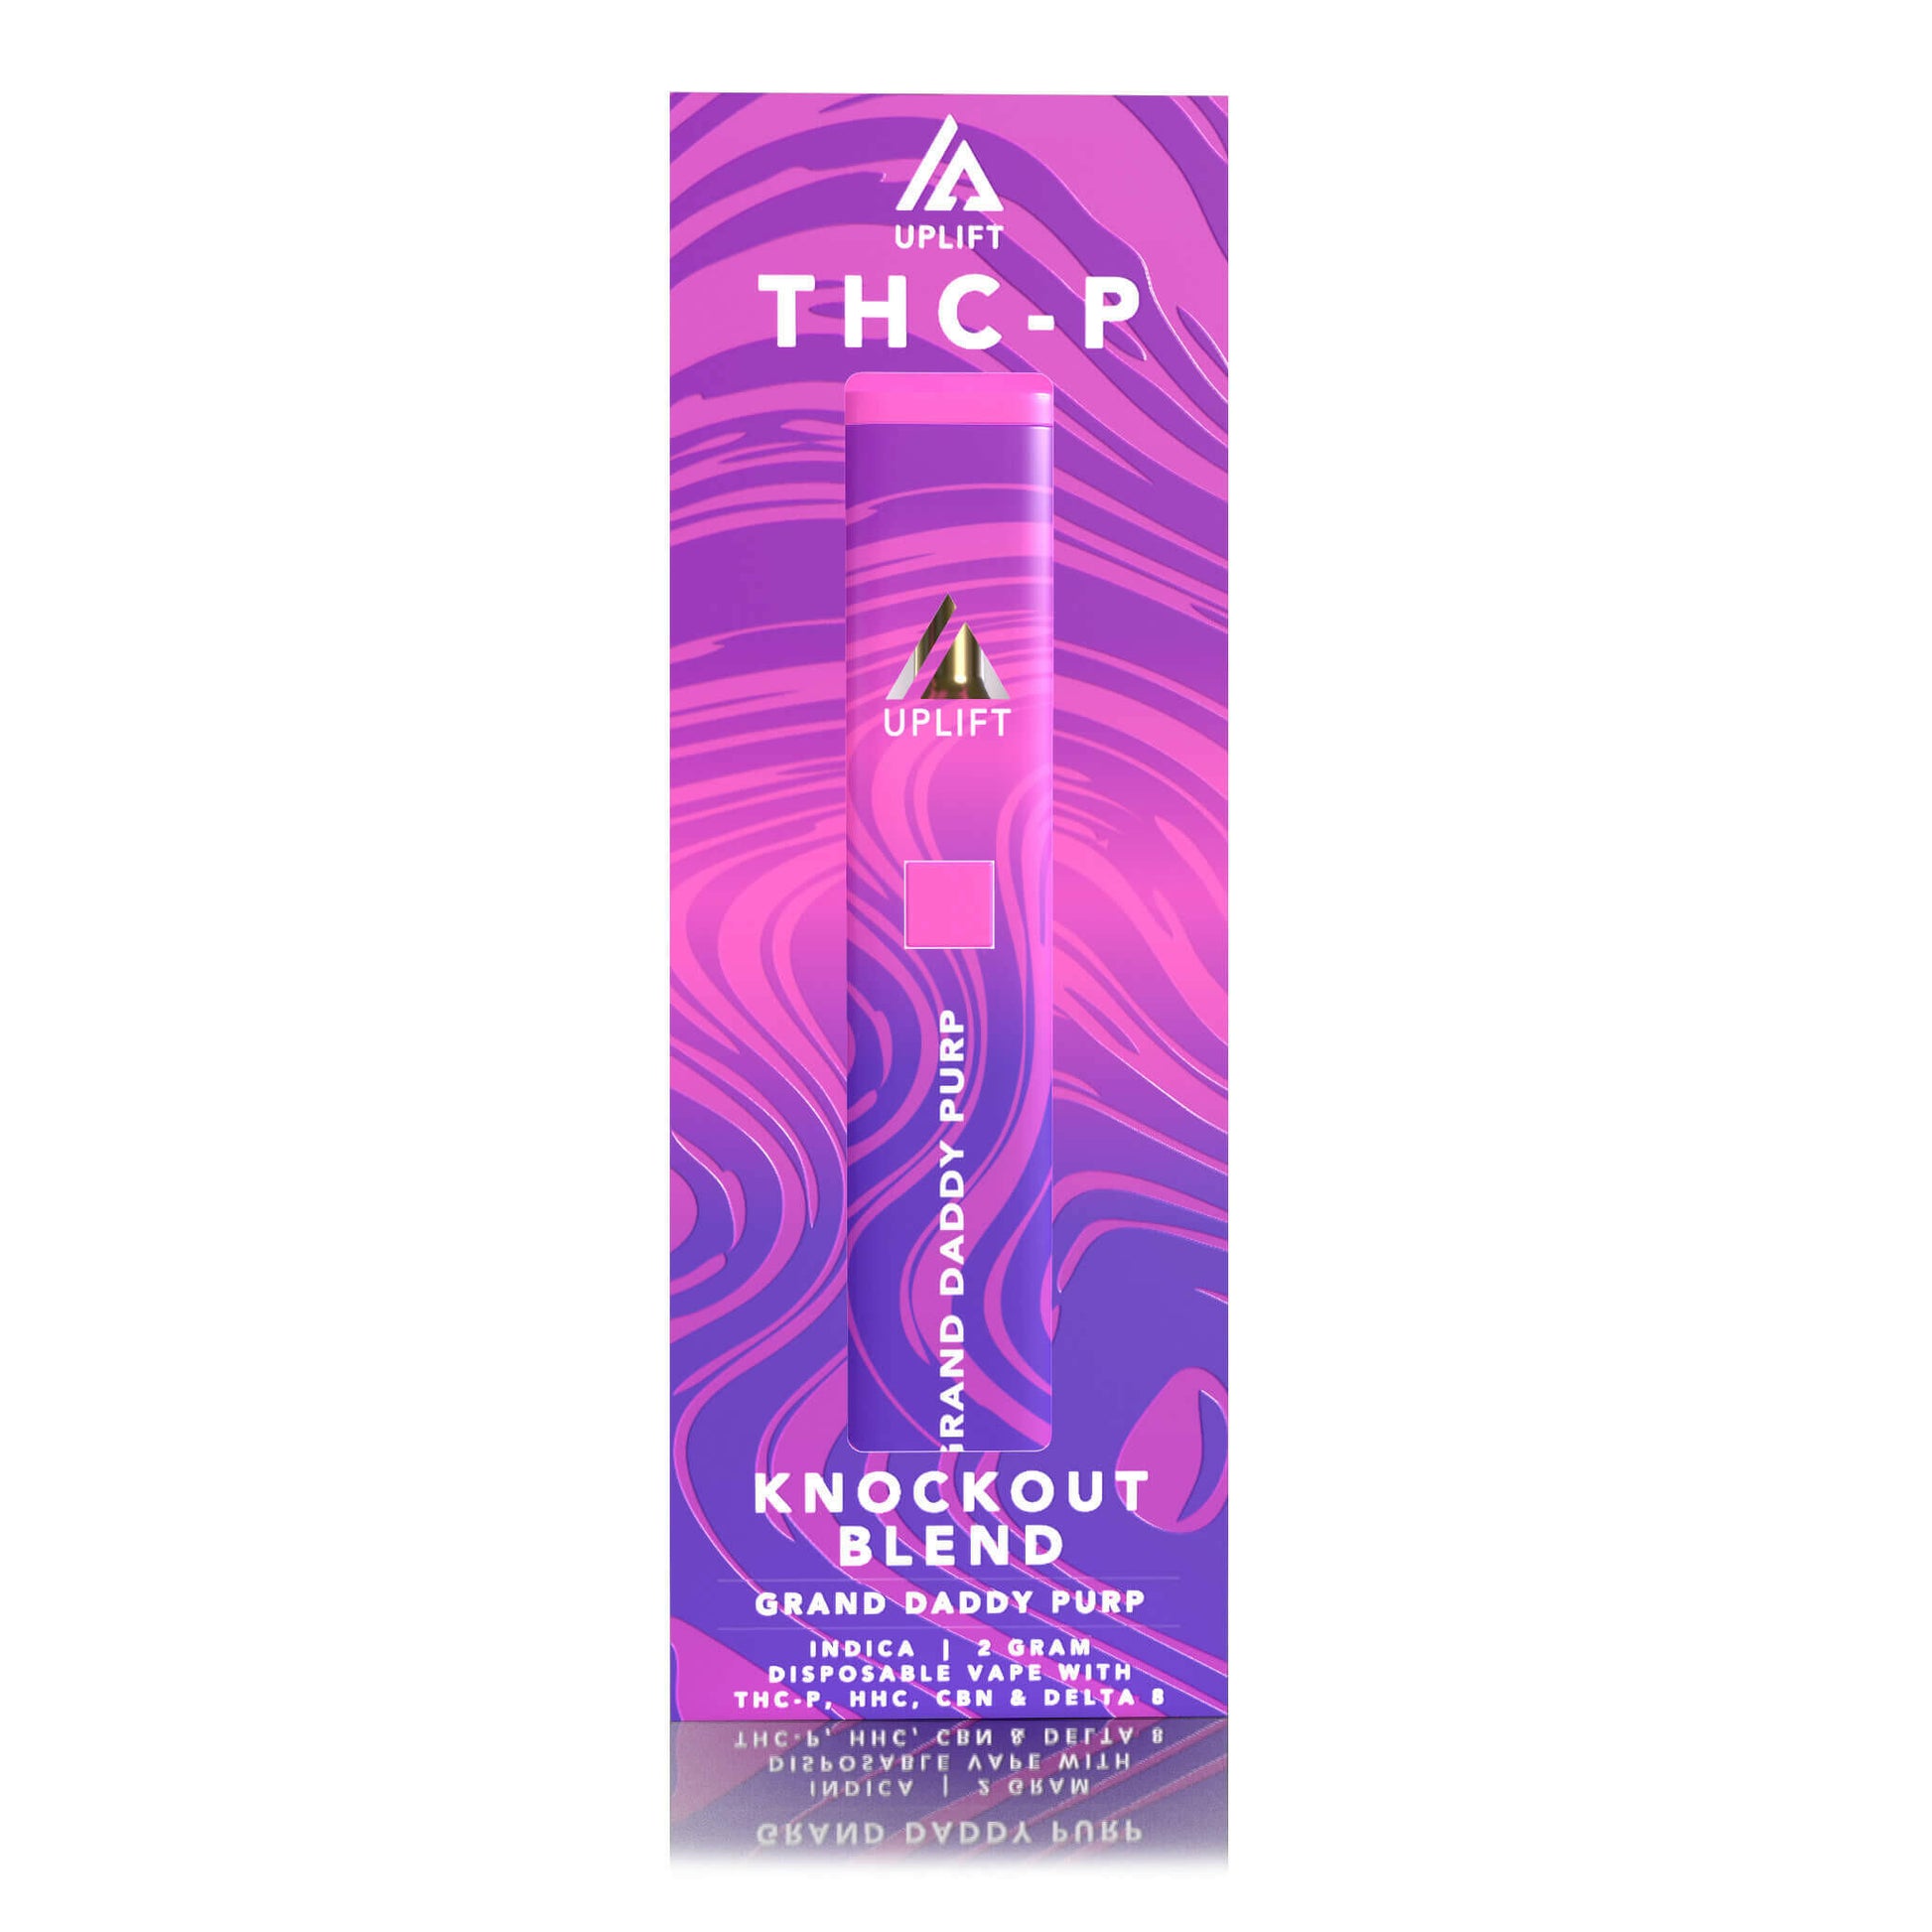 UPLIFT-THC-P-Knockout-Blend-Disposable-Vape-Device-2G-grand-daddy-purp-indica